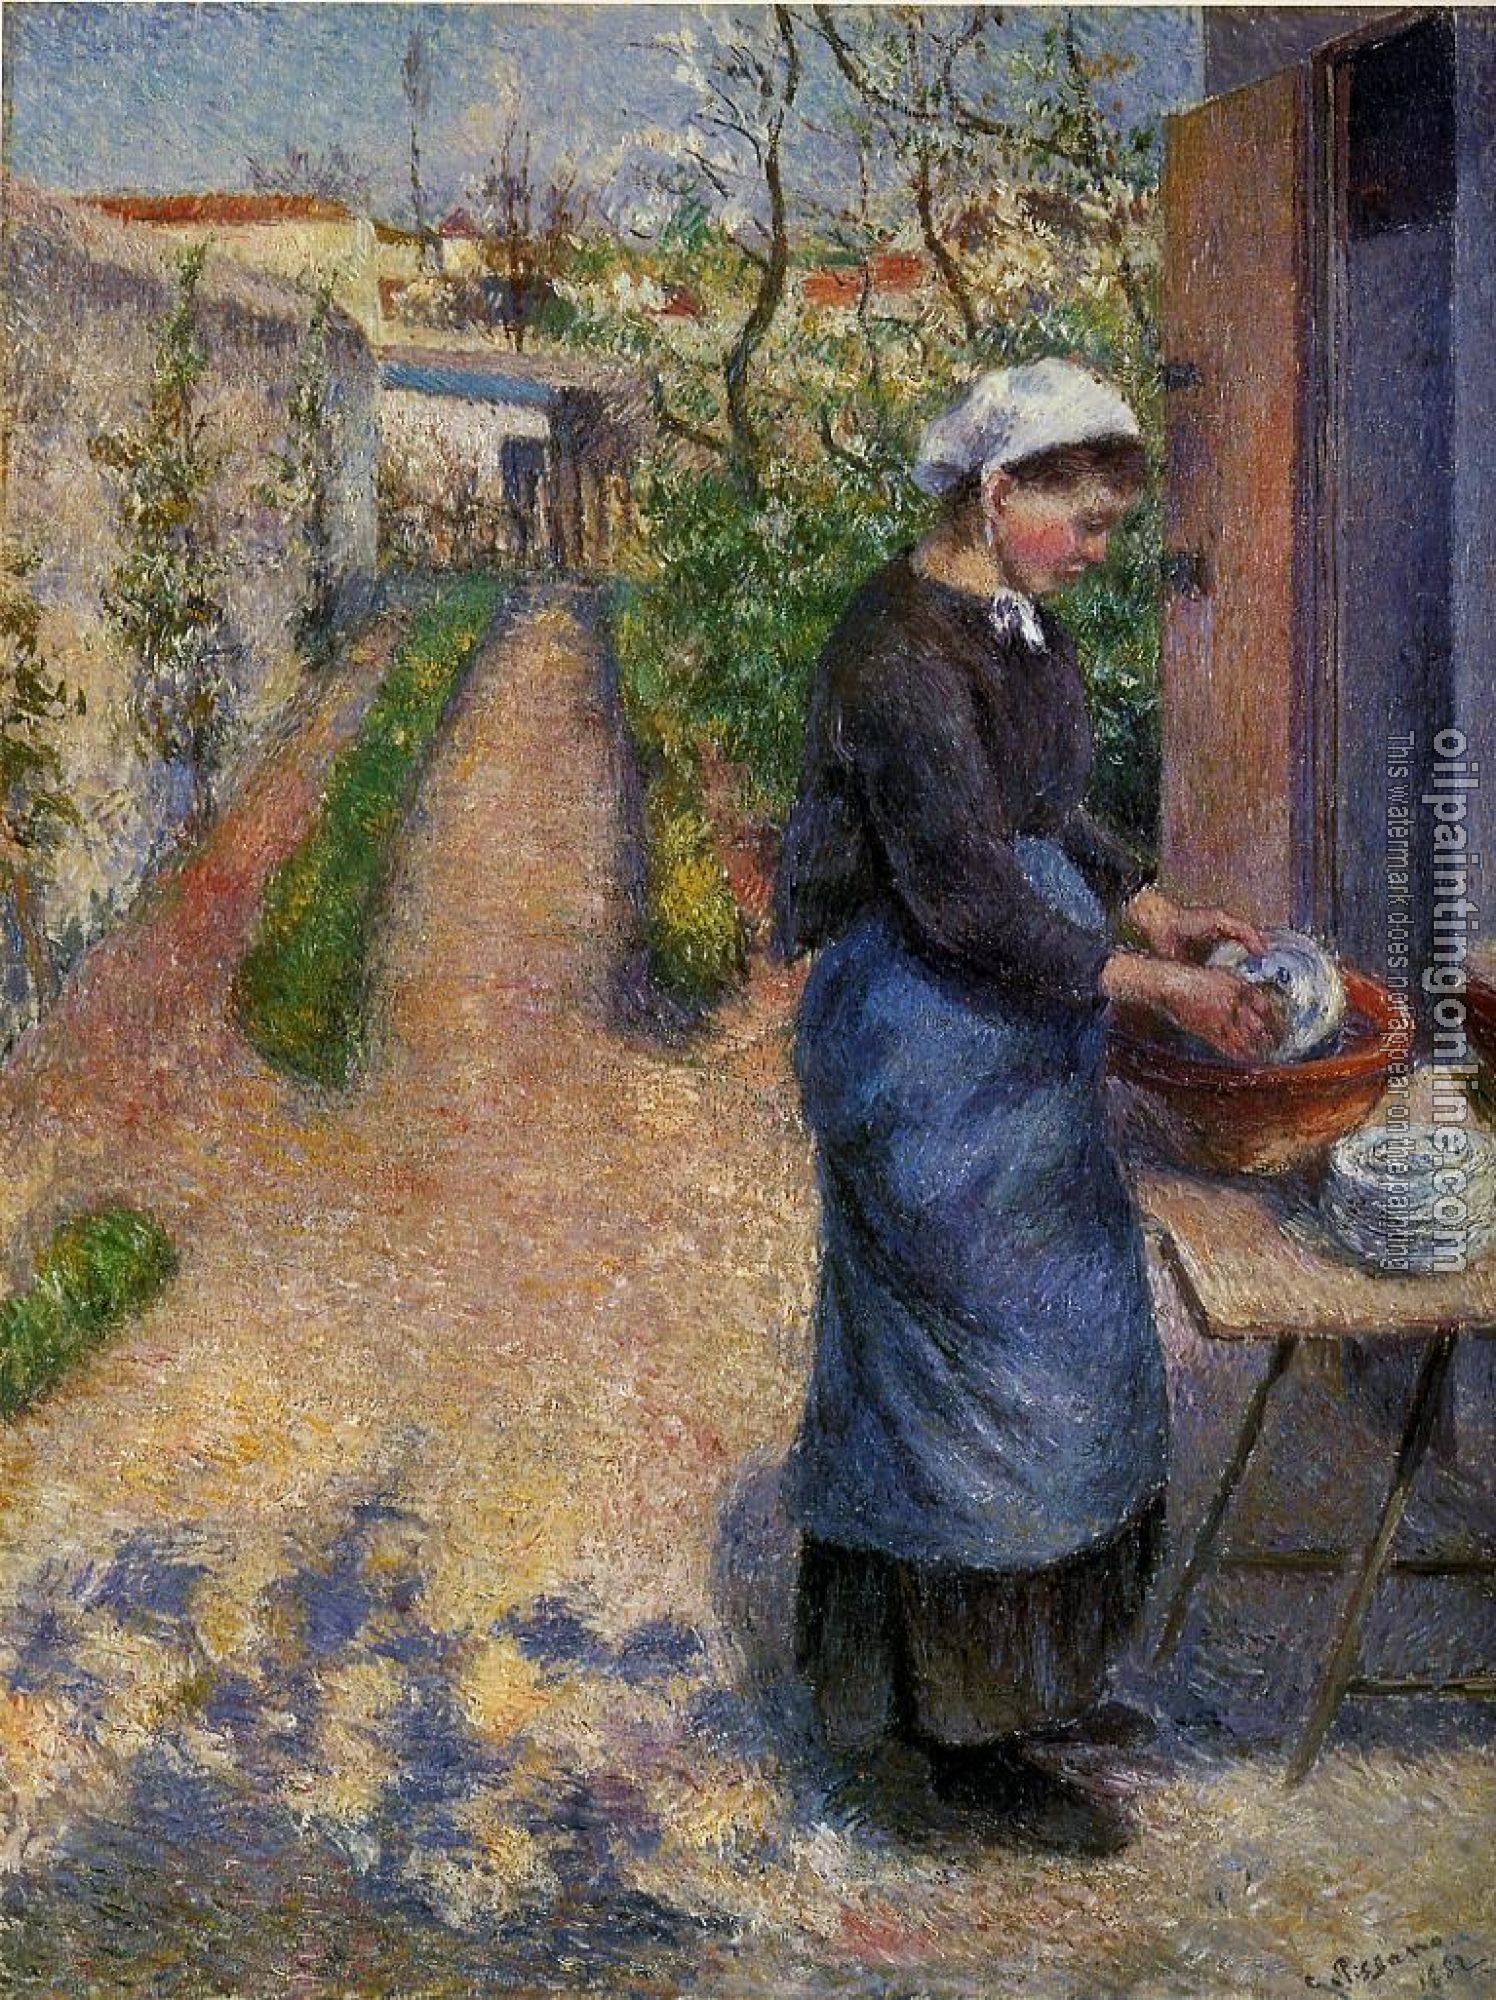 Pissarro, Camille - Young Woman Washing Plates